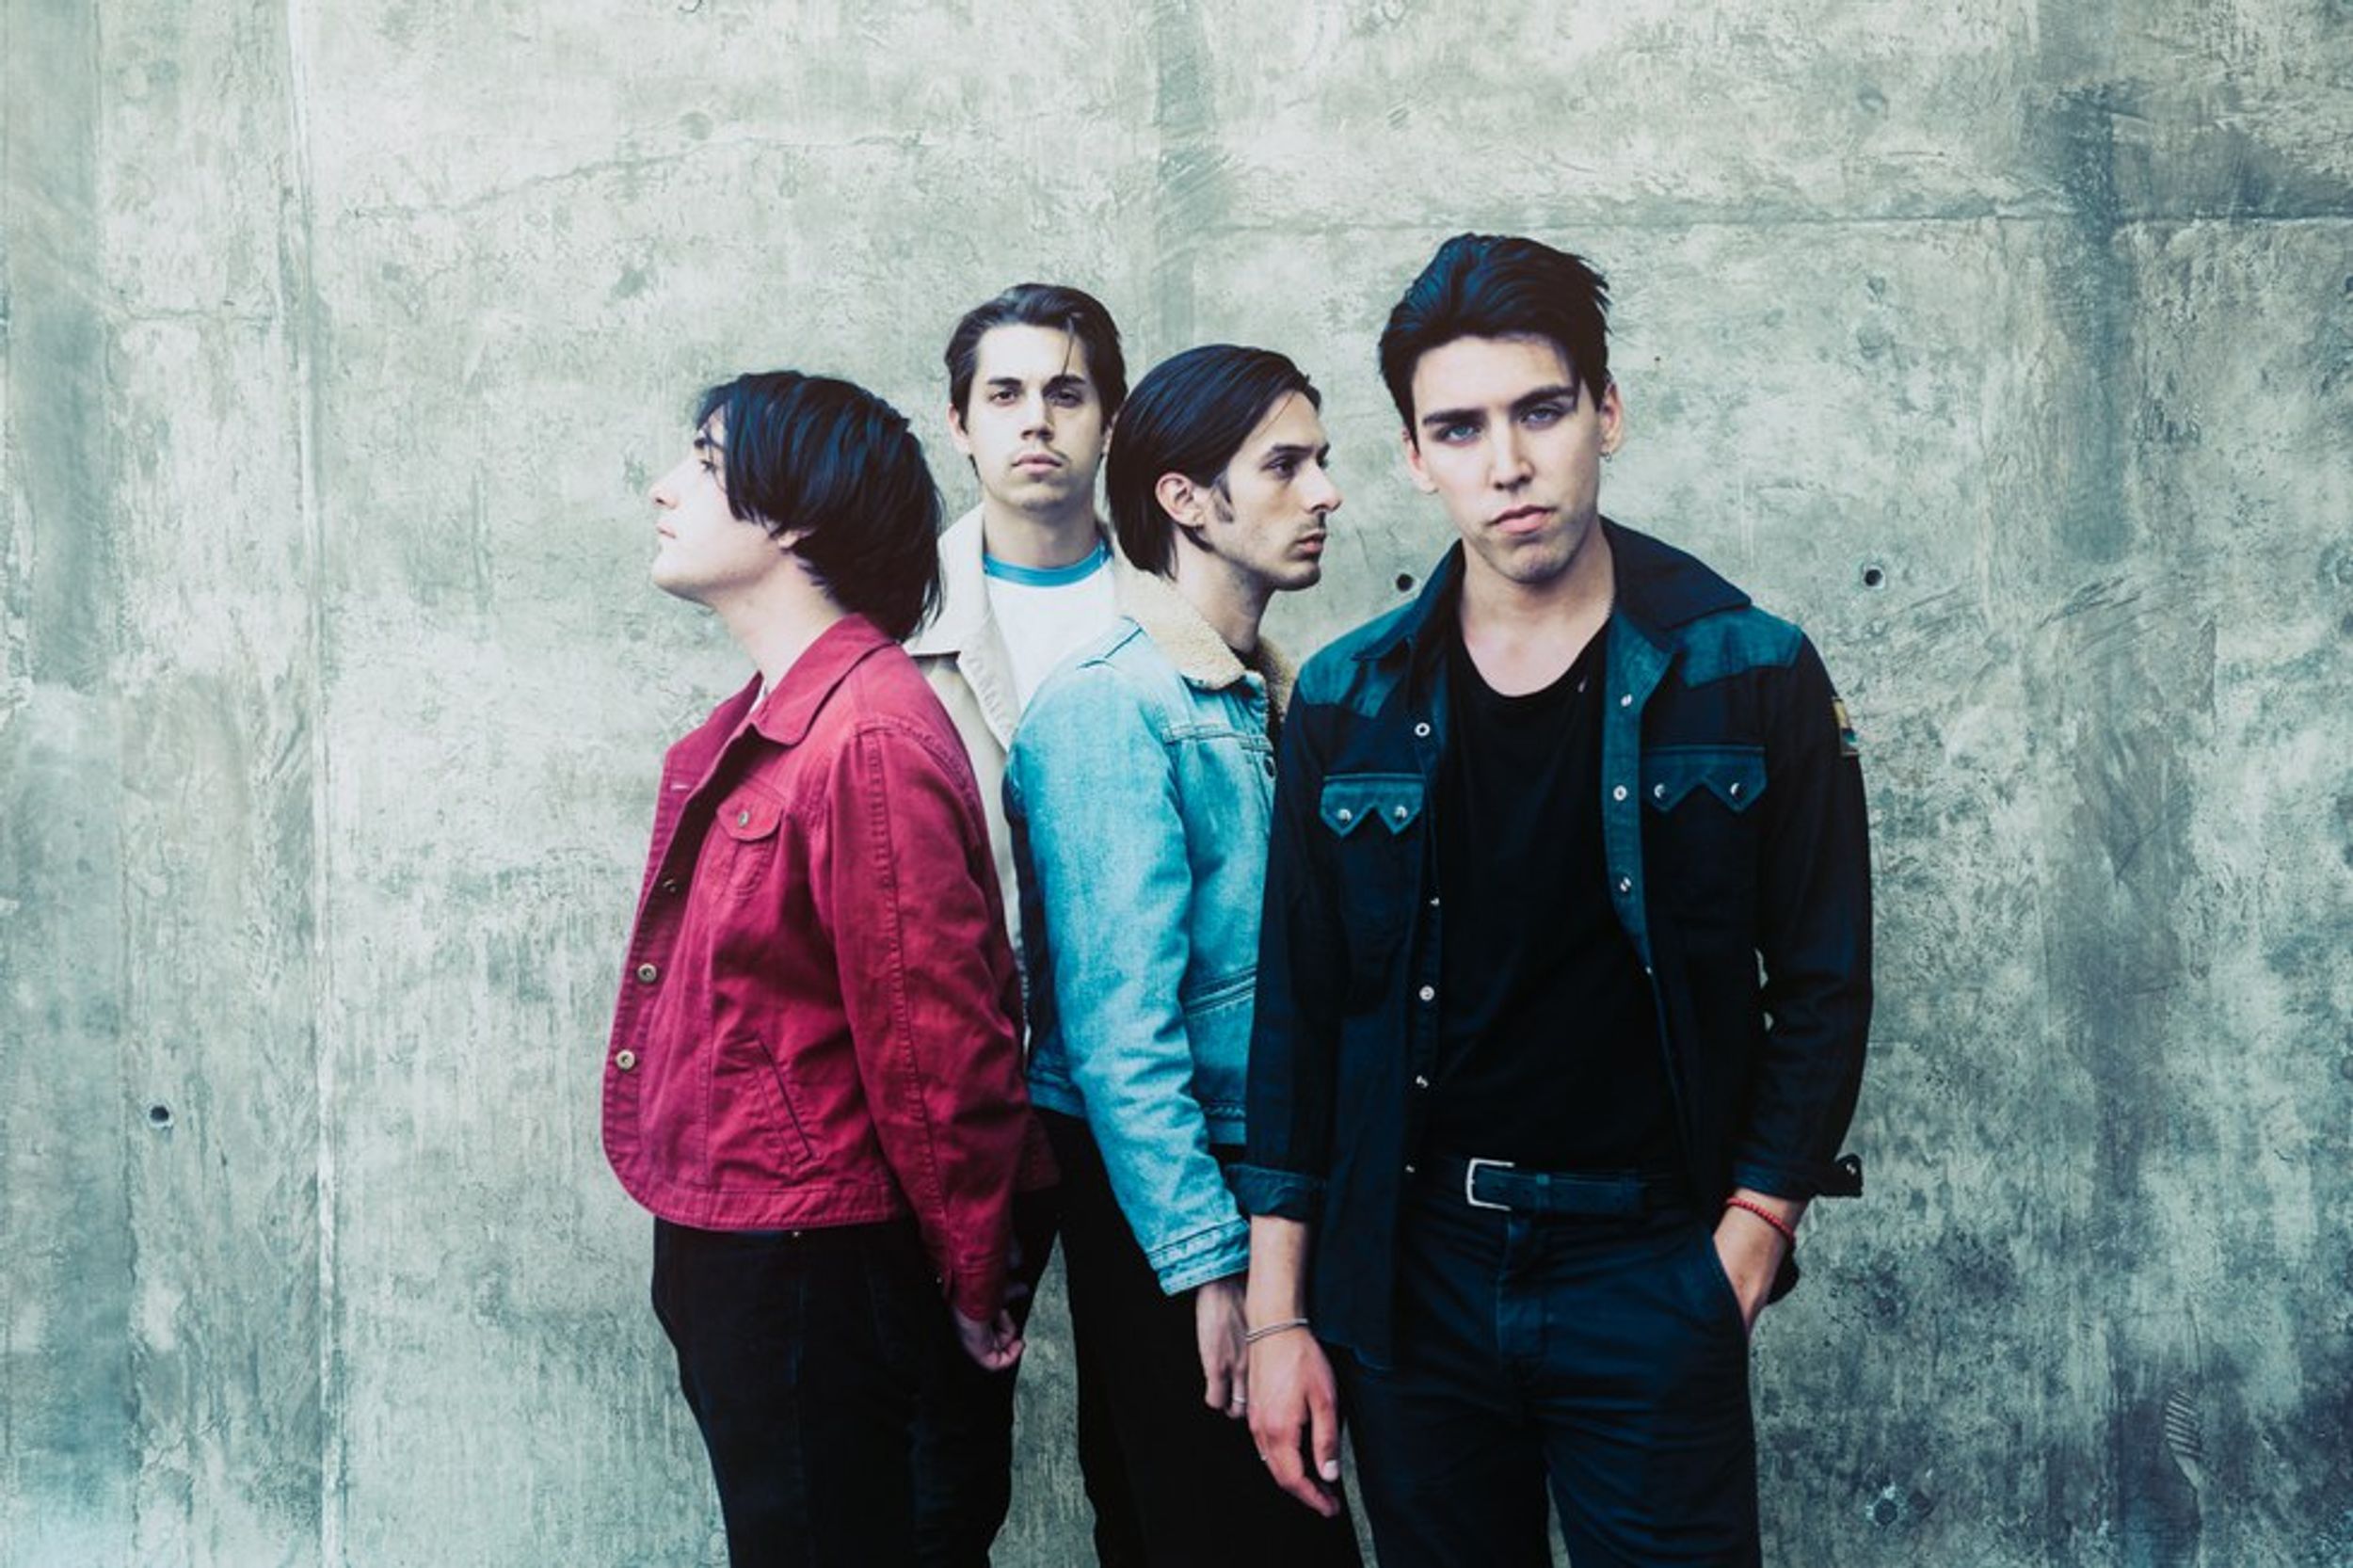 Concert Review: Bad Suns